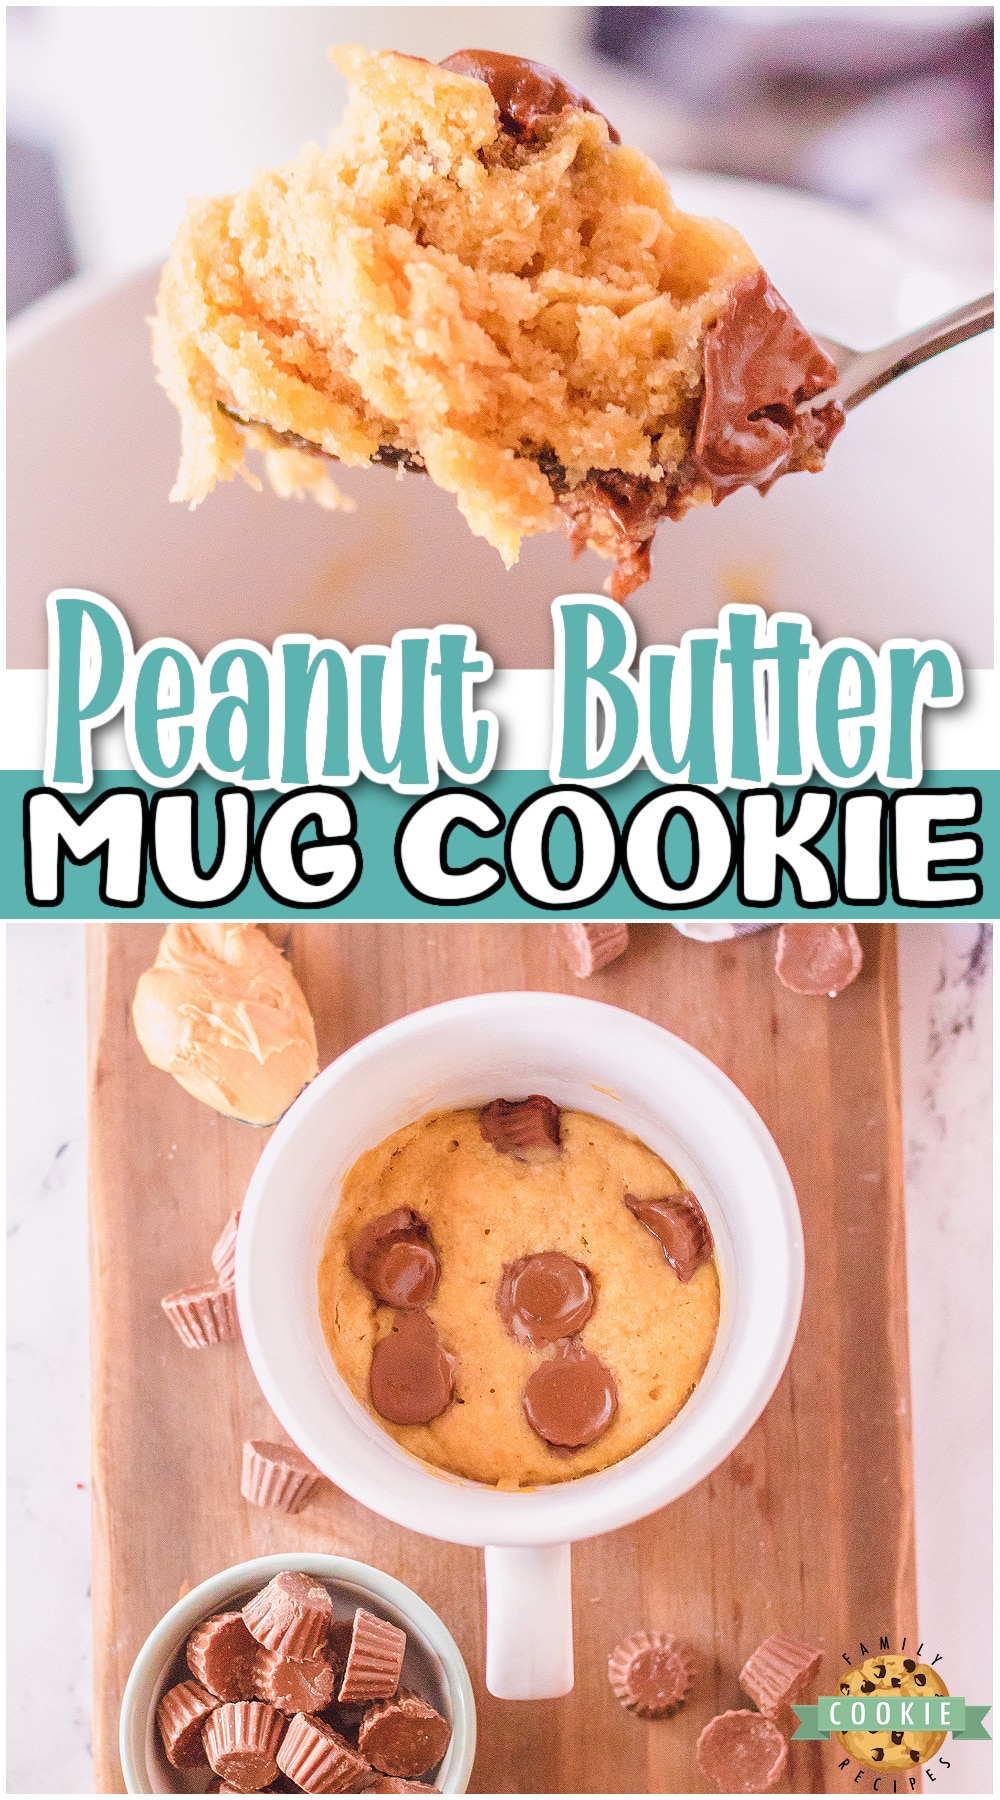 Peanut Butter Cookie in a Mug is a quick & tasty single serving treat to enjoy when your sweet craving strikes! This Cookie in a Mug recipe is ready in just 6 minutes, there is nothing better than that! 